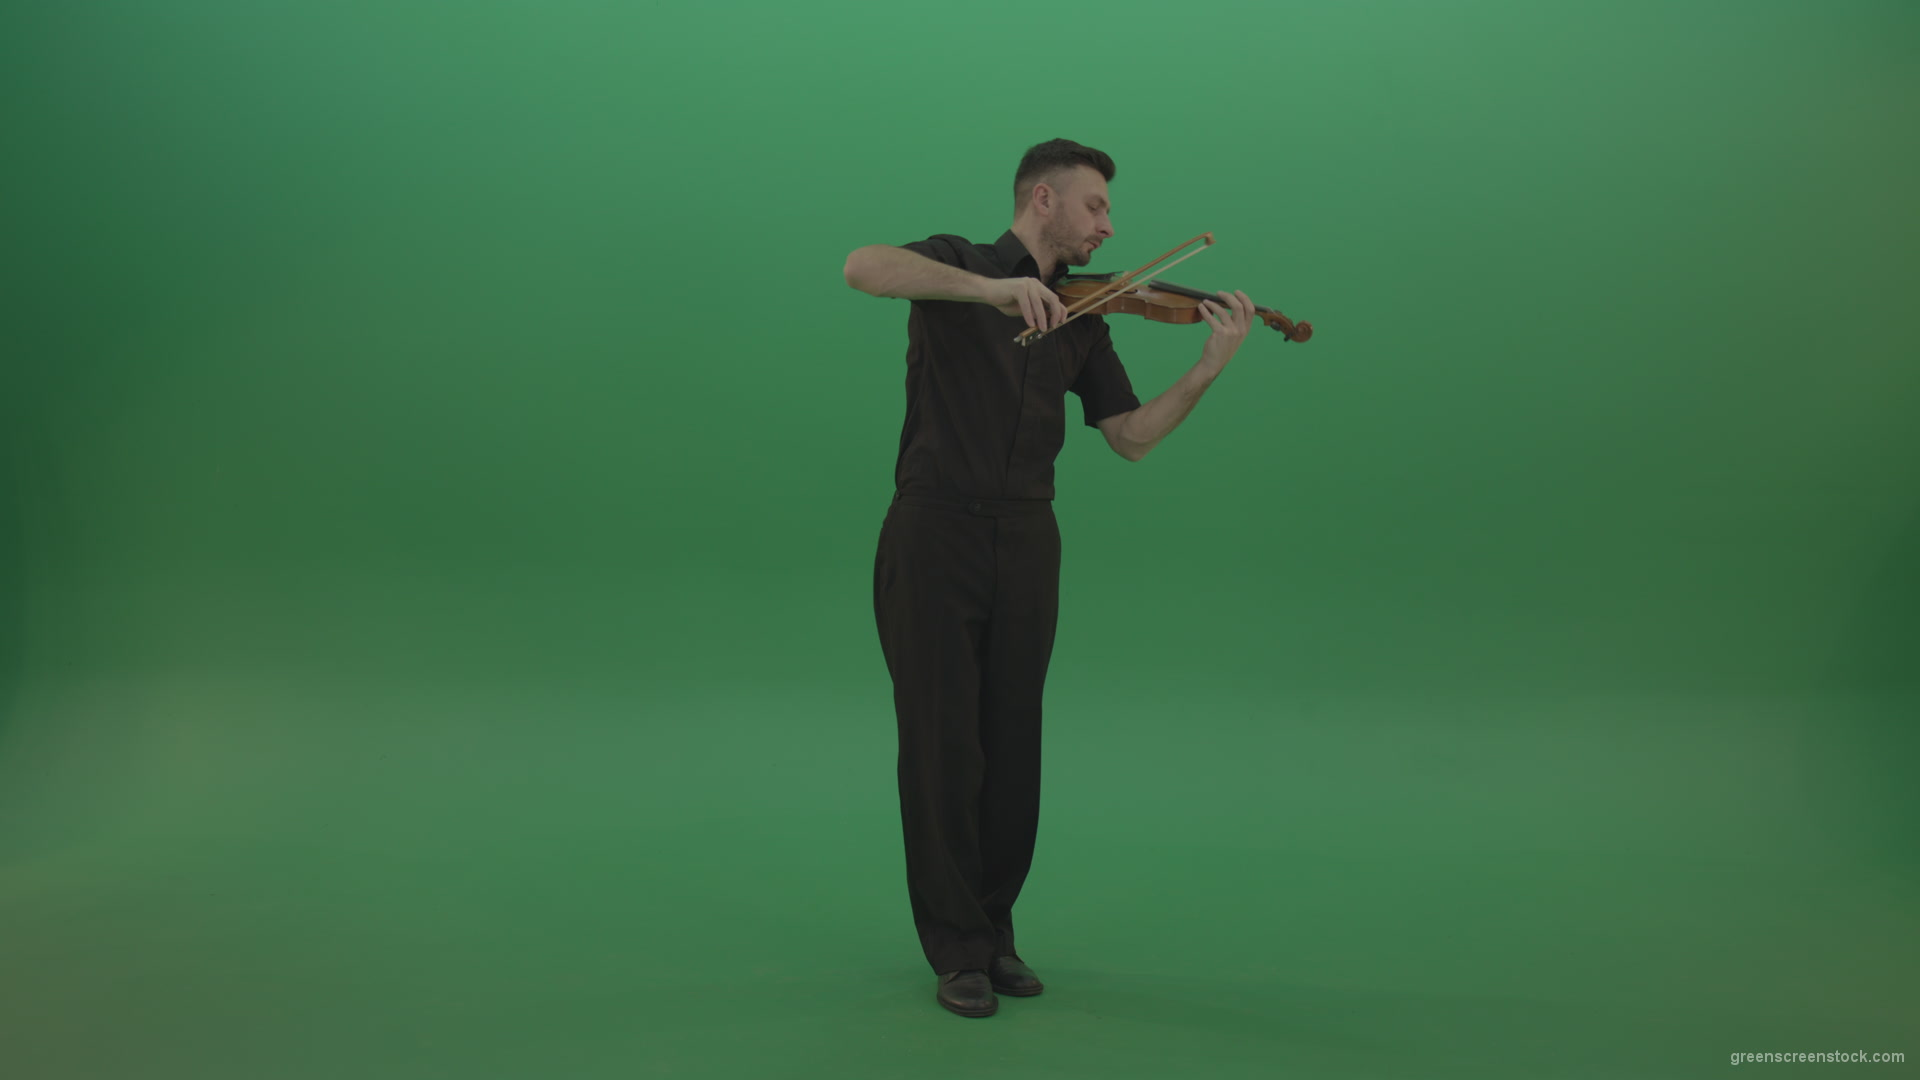 Full-size-view-virtuoso-Man-in-black-costume-play-violin-fiddle-strings-music-instument-on-green-screen_005 Green Screen Stock